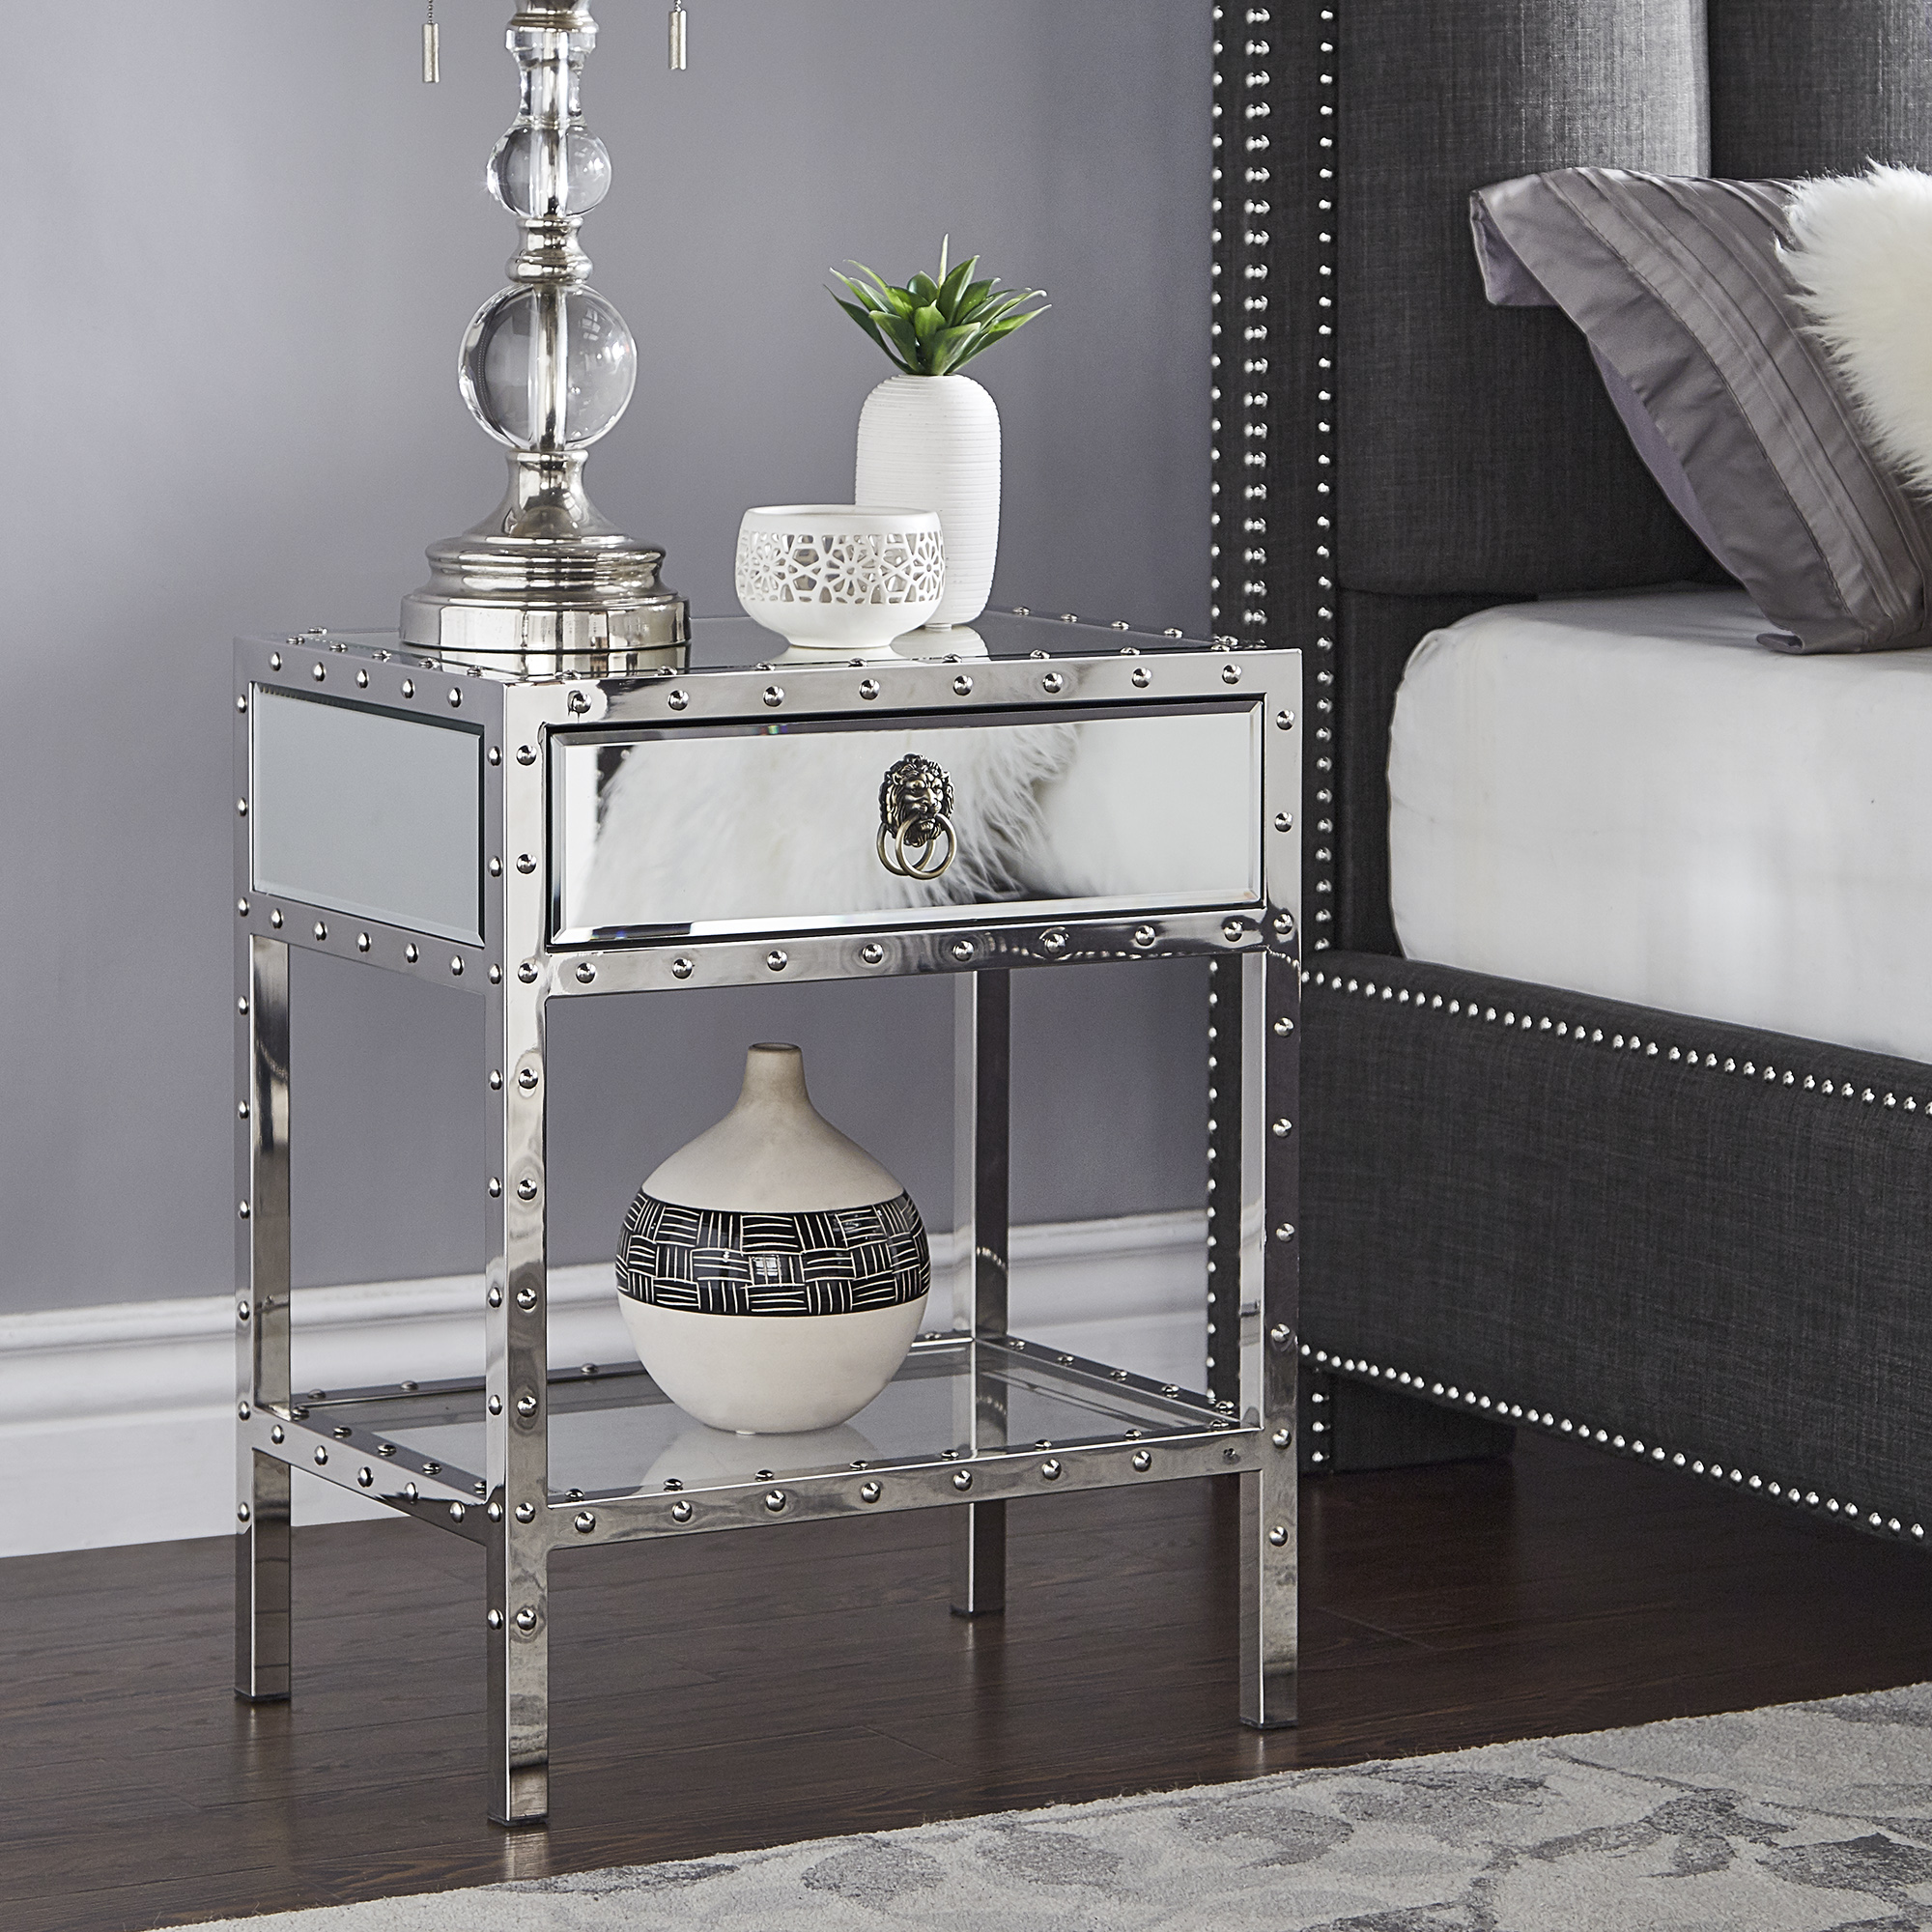 Riveted Stainless-Steel Mirrored Accent Table